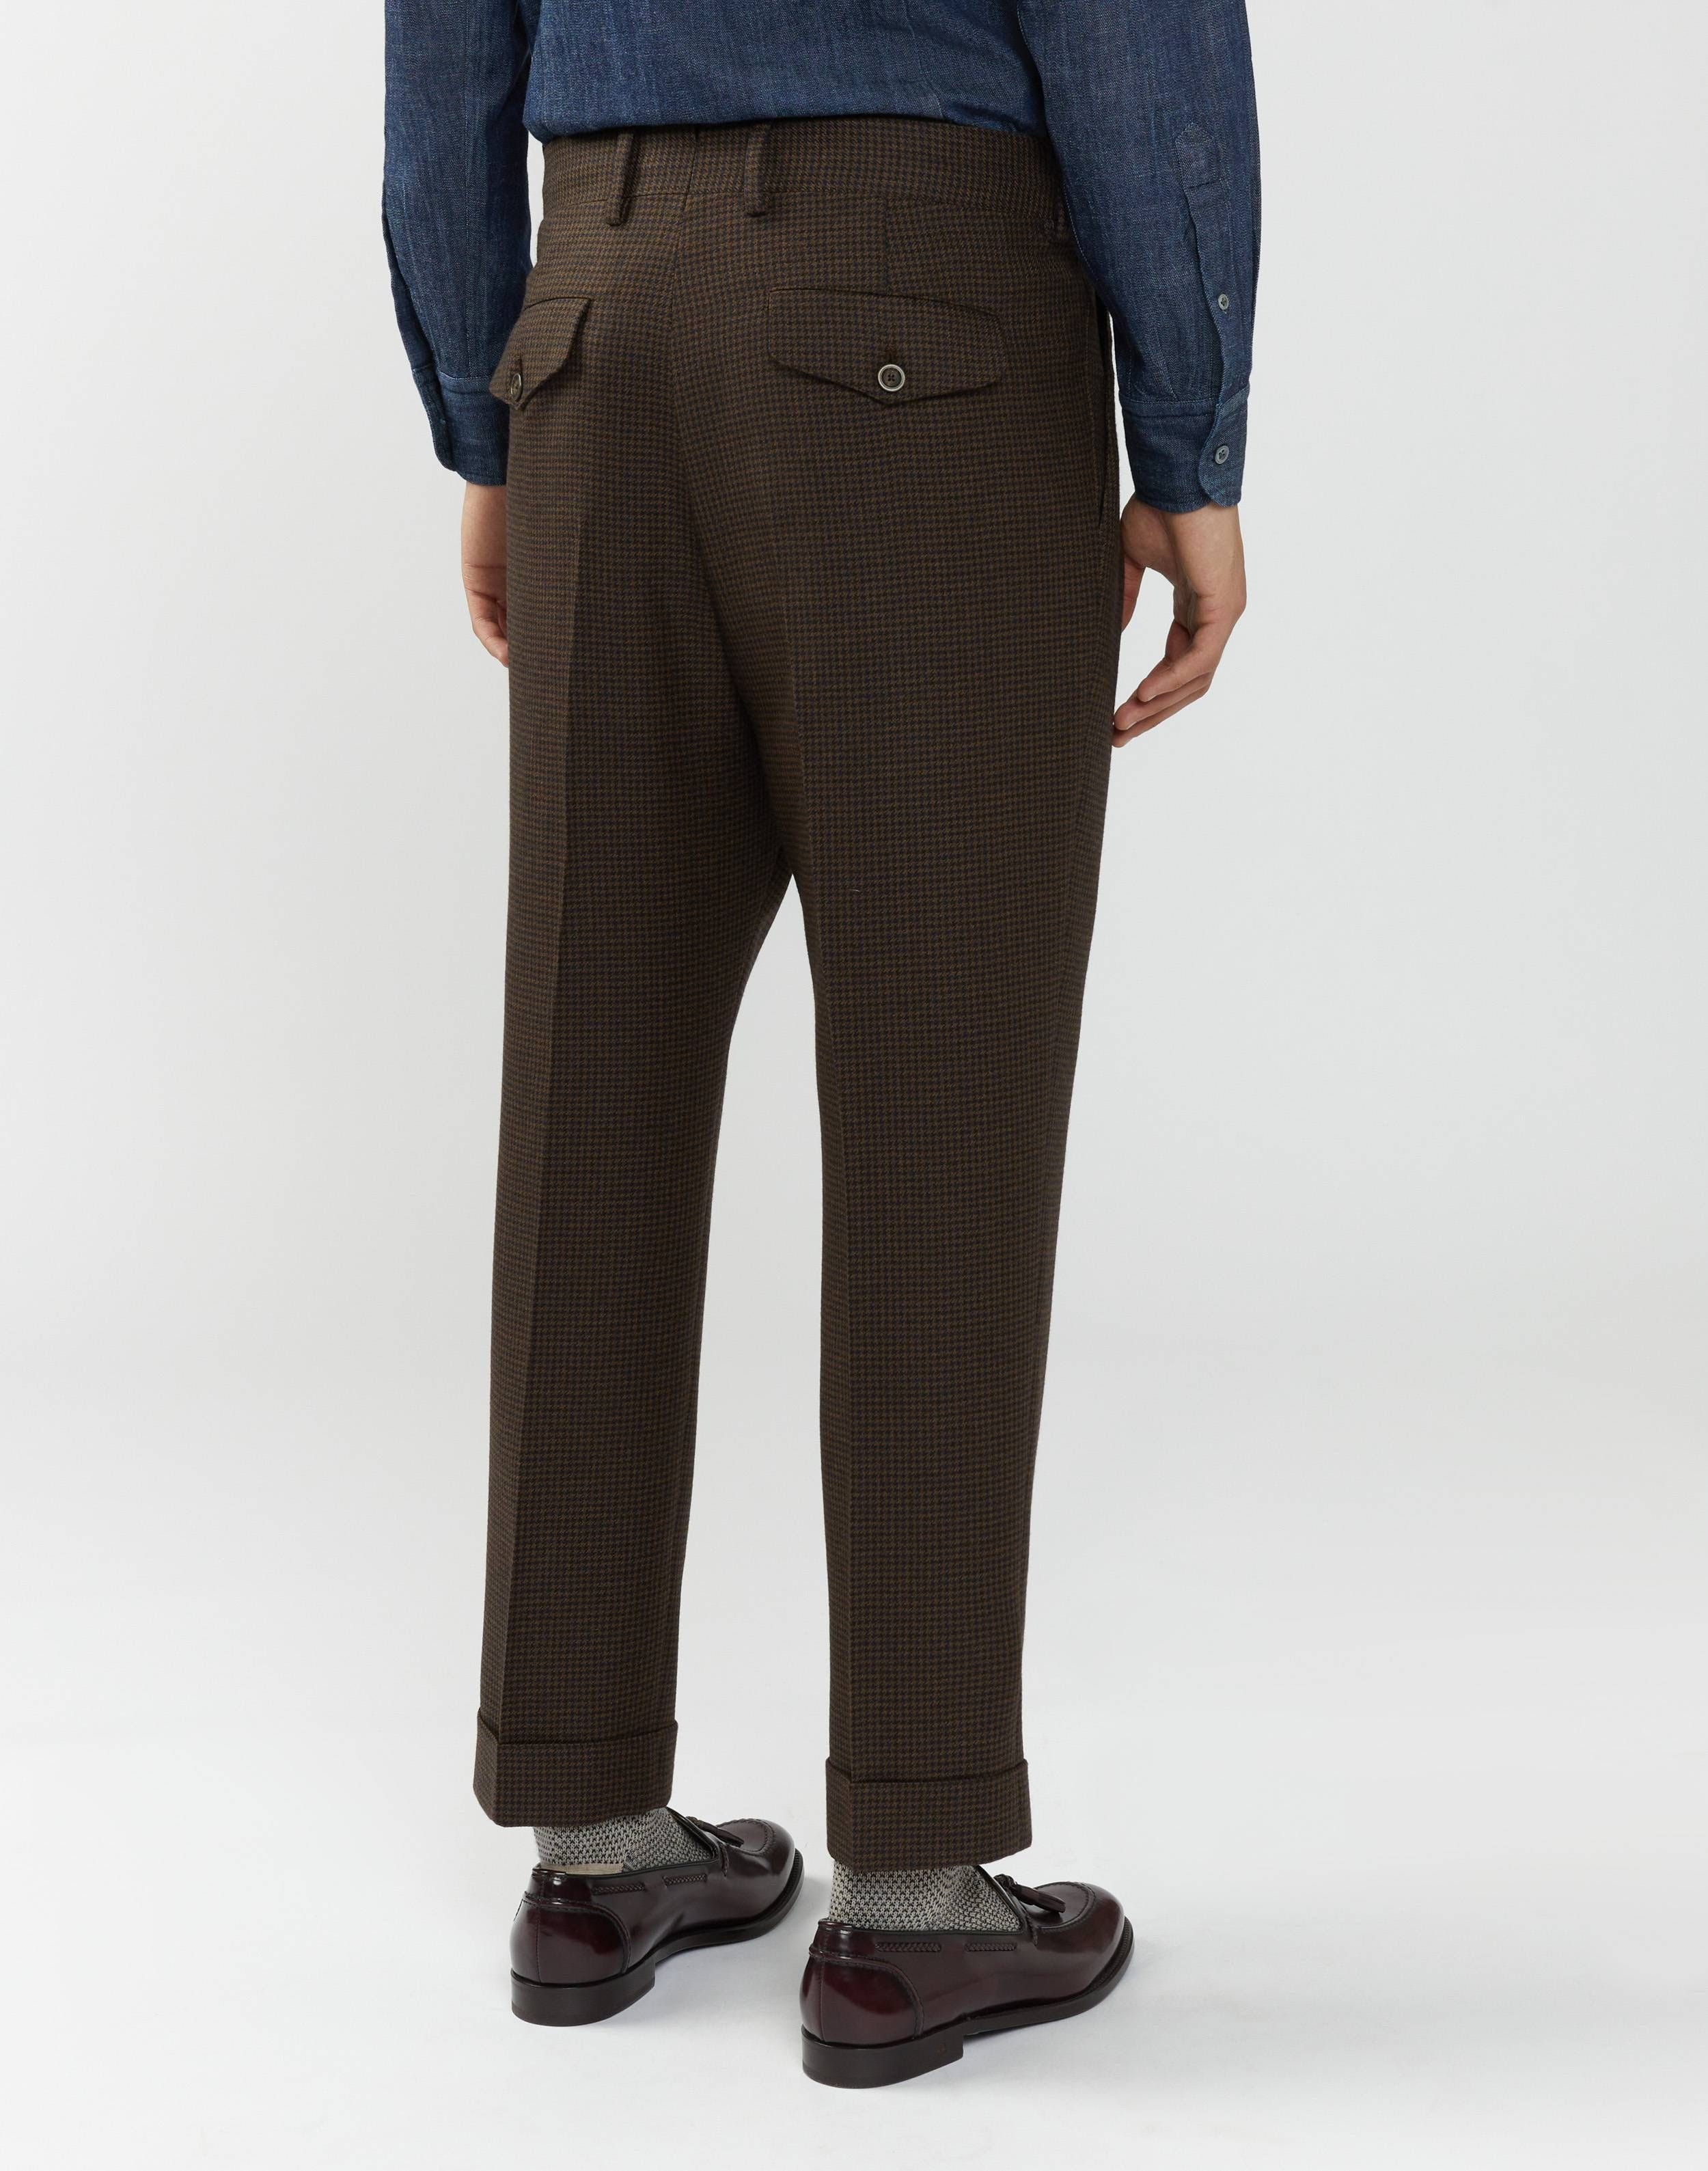 Double-pleat trousers in a blue-and-brown micro houndstooth pattern